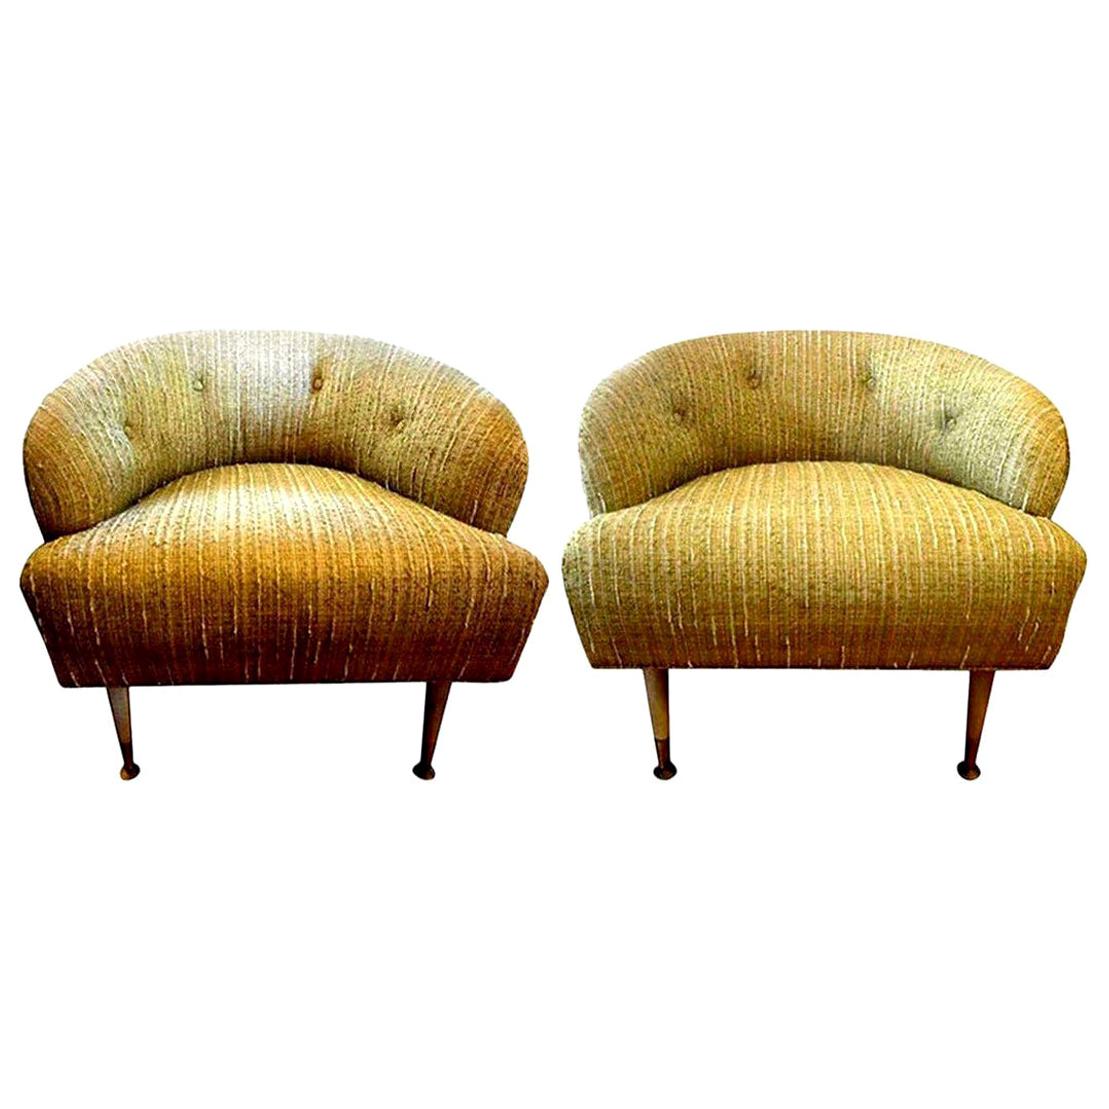 Chic and comfortable pair of Italian Gio Ponti inspired midcentury barrel back lounge chairs. These fabulous Italian lounge chairs, club chairs or side chairs have like beautiful neutral chenille like upholstery with tufted button backs. These